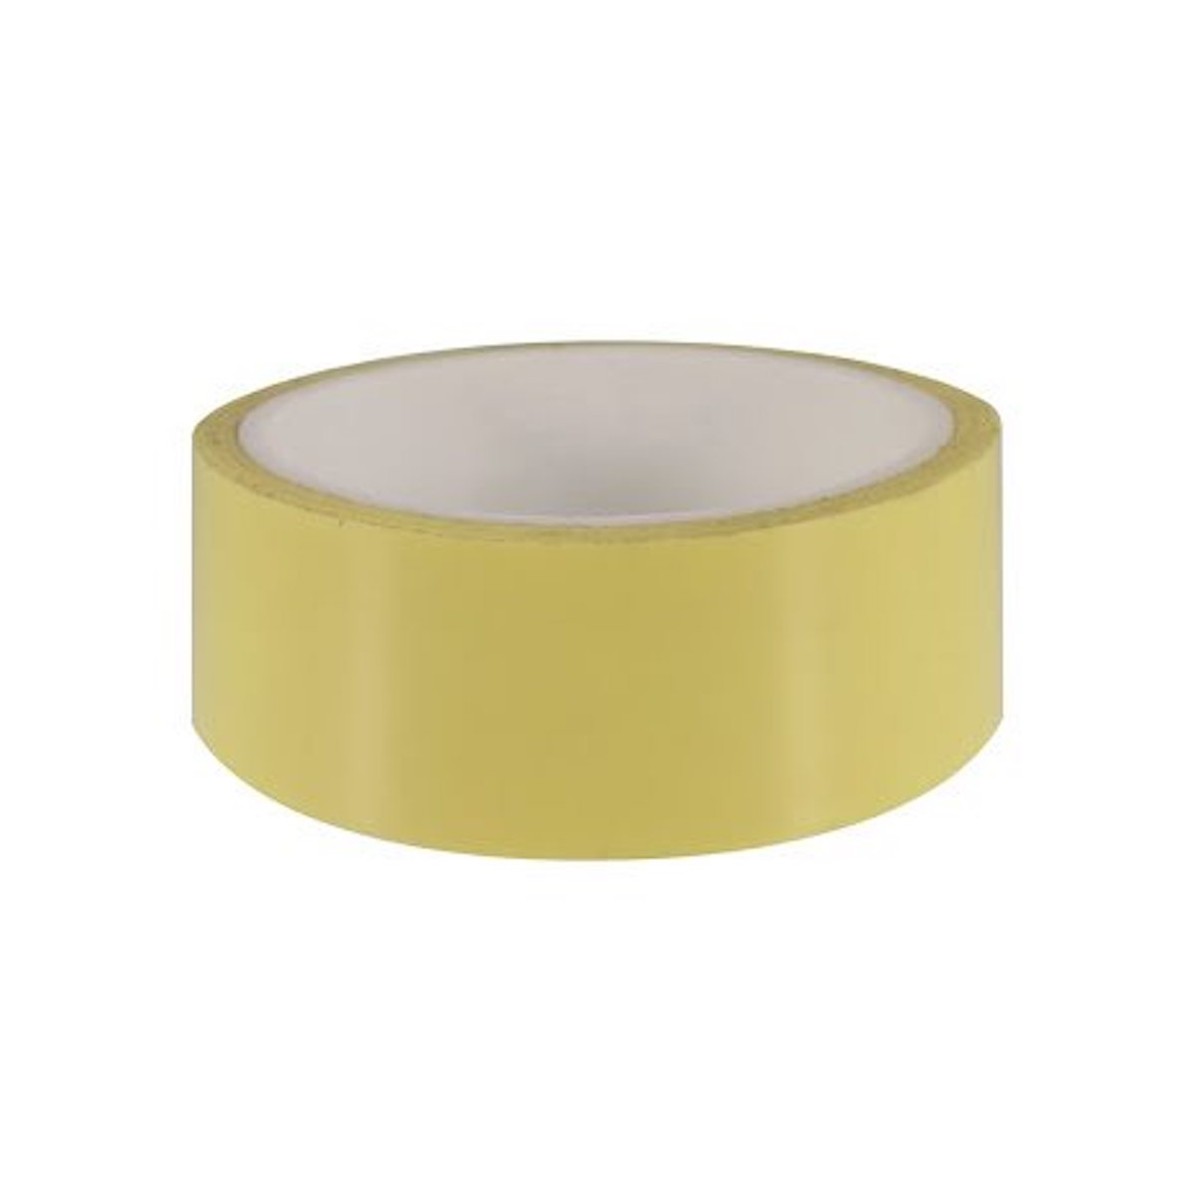 WAG 18mm tubeless tape